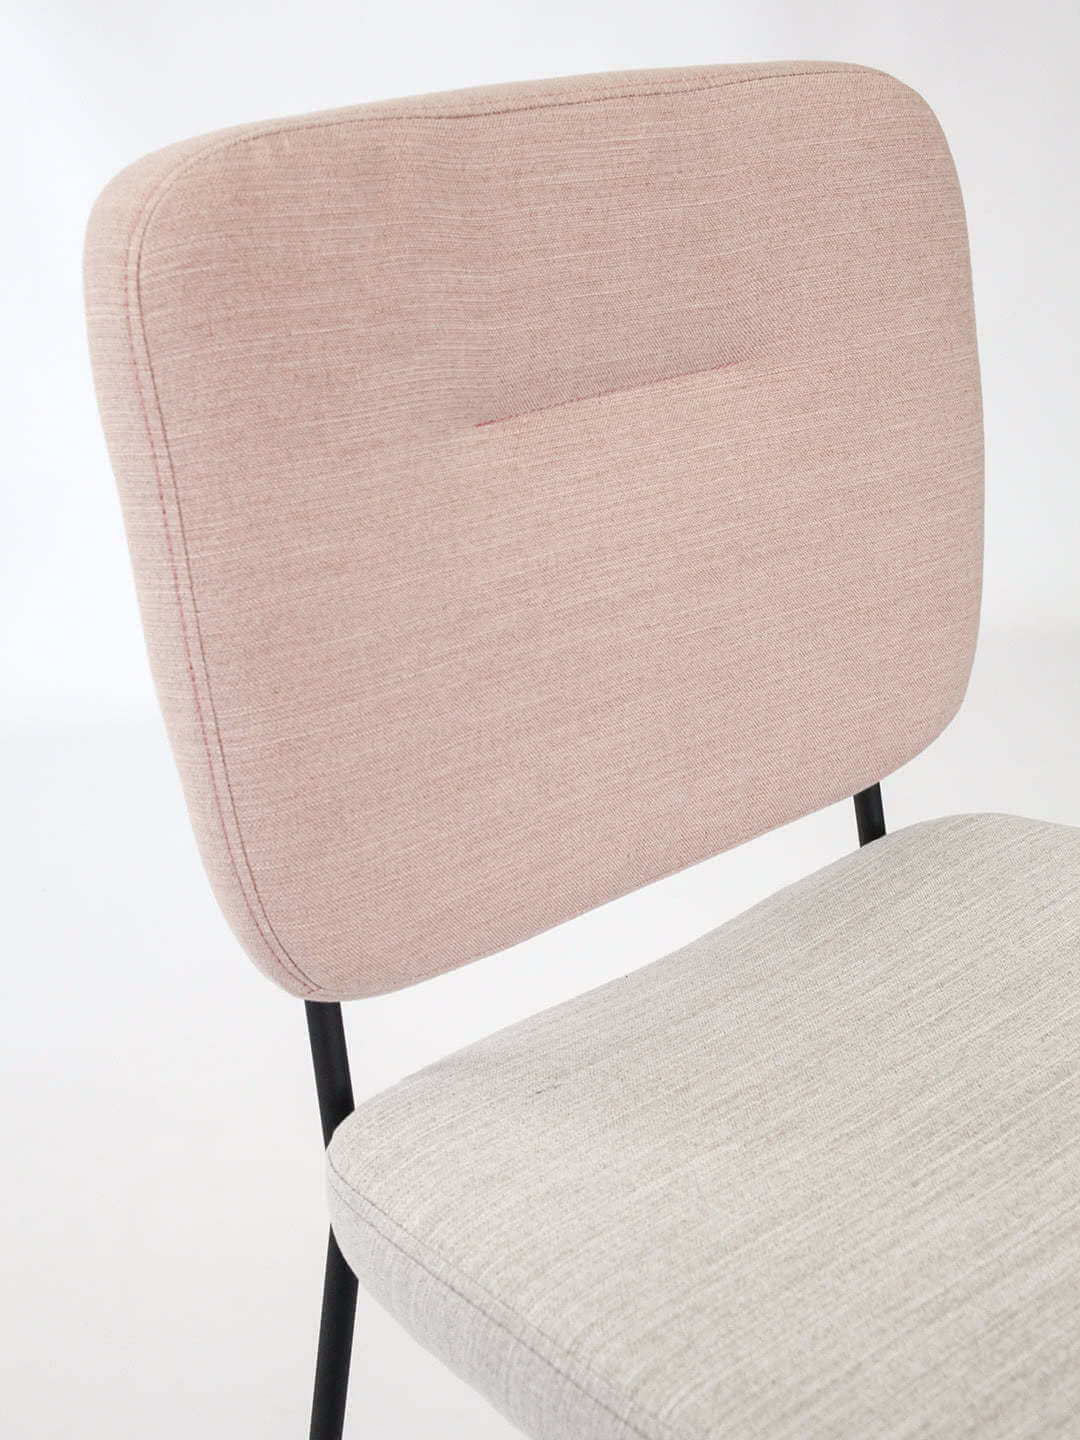 Candy dinign chair in two tone fabric in pink and natural with black legs detail of chair